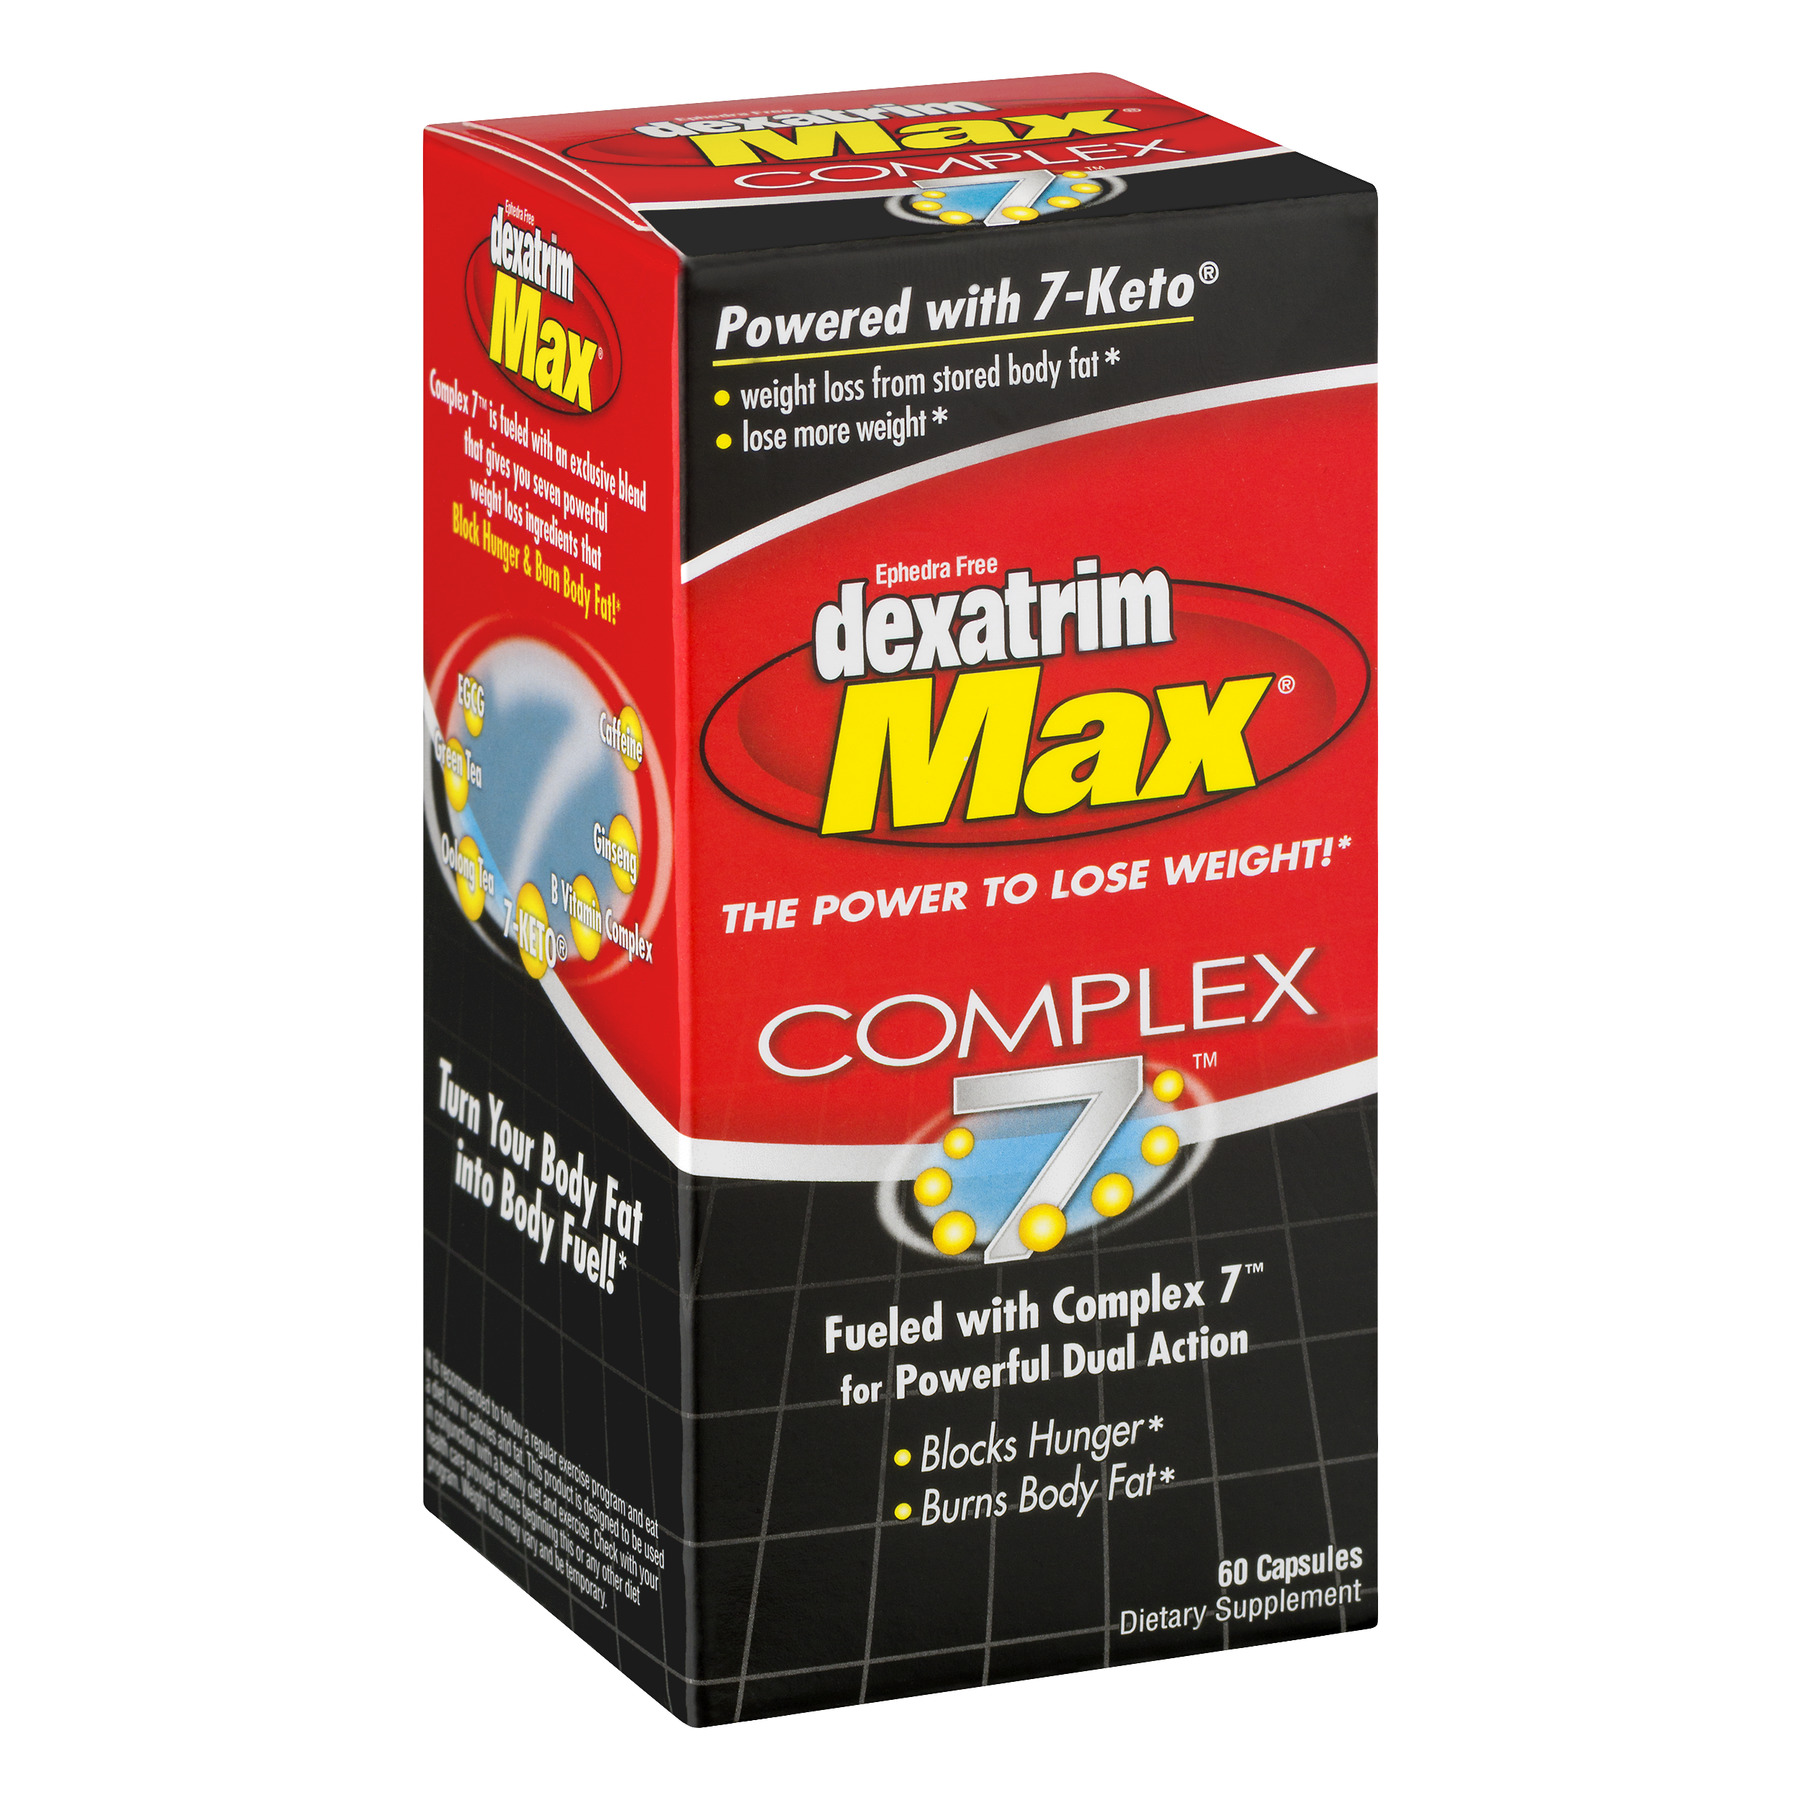 Dexatrim Max Complex Appetite Suppressant Weight Loss Dietary Supplement, Ctules, 60 Ct - image 7 of 7